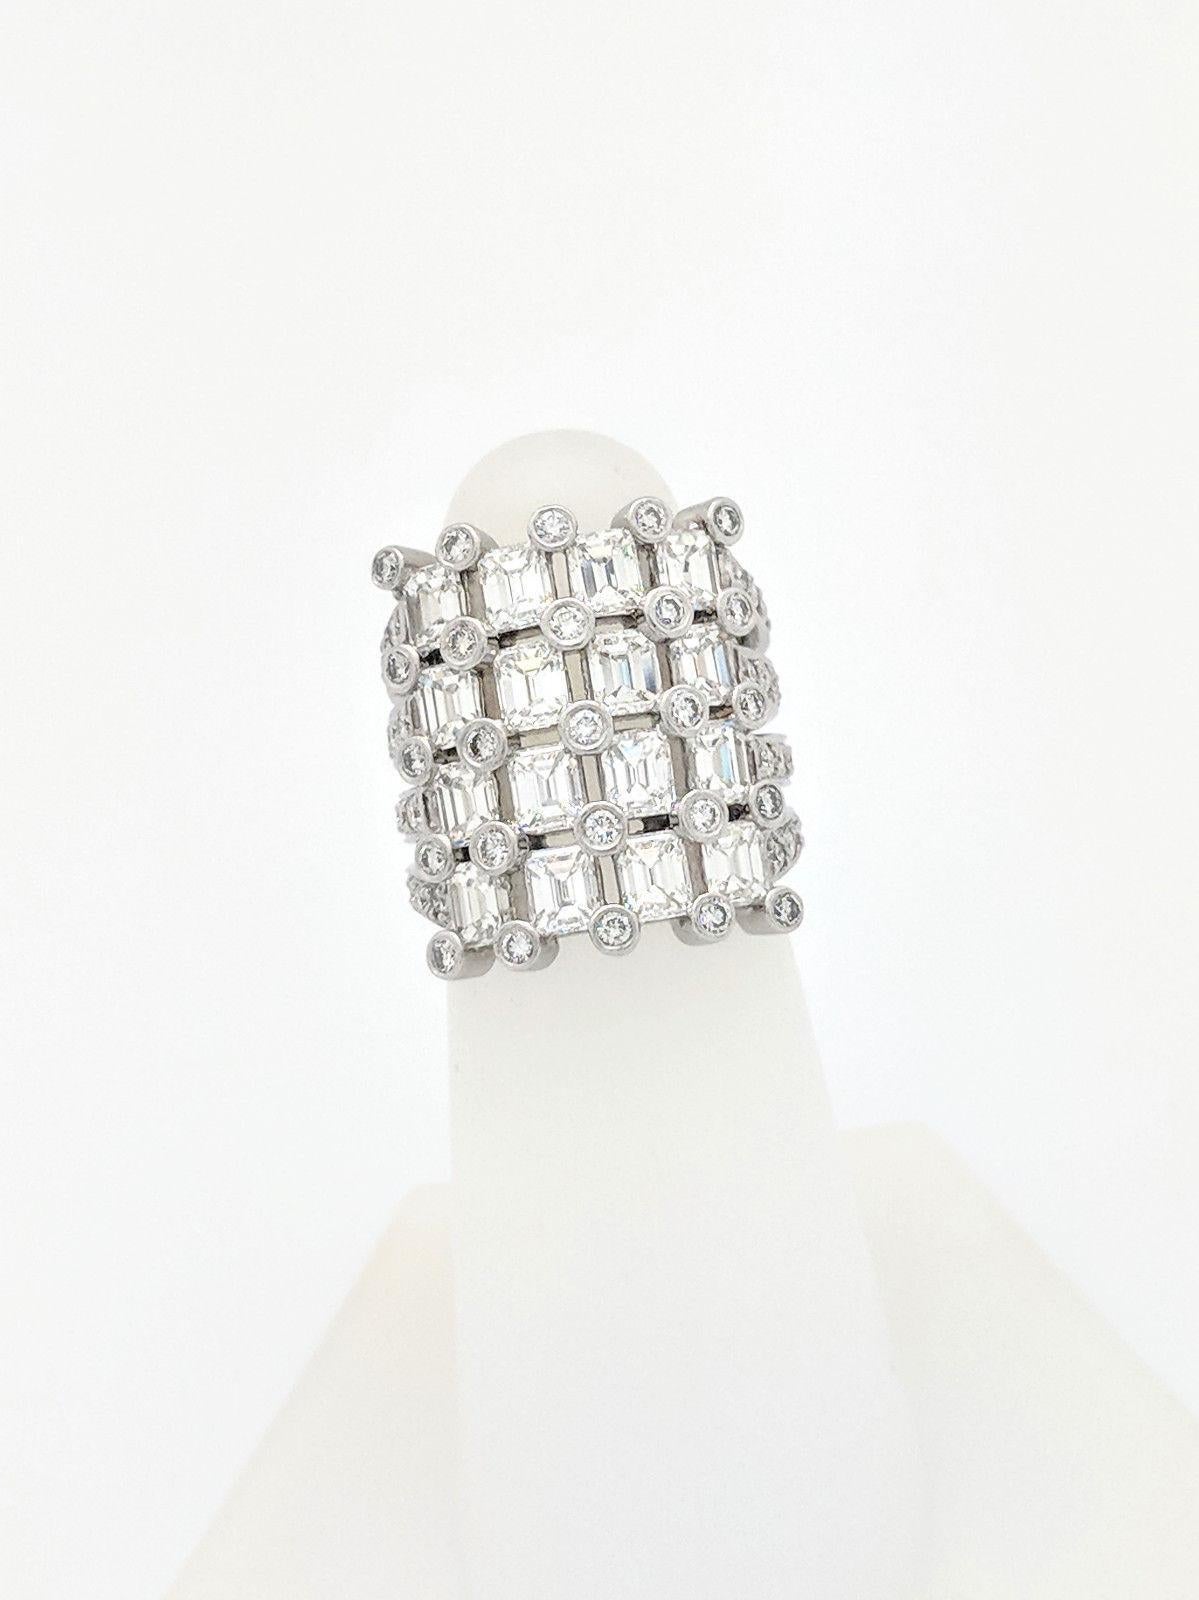 You are viewing an exquisite Diamond Cocktail Ring. Any woman would love to add this one of a kind piece to their collection!

This ring is crafted from 18k white gold and weighs 14.5 grams. It features 3.95tcw of natural Emerald cut diamonds and